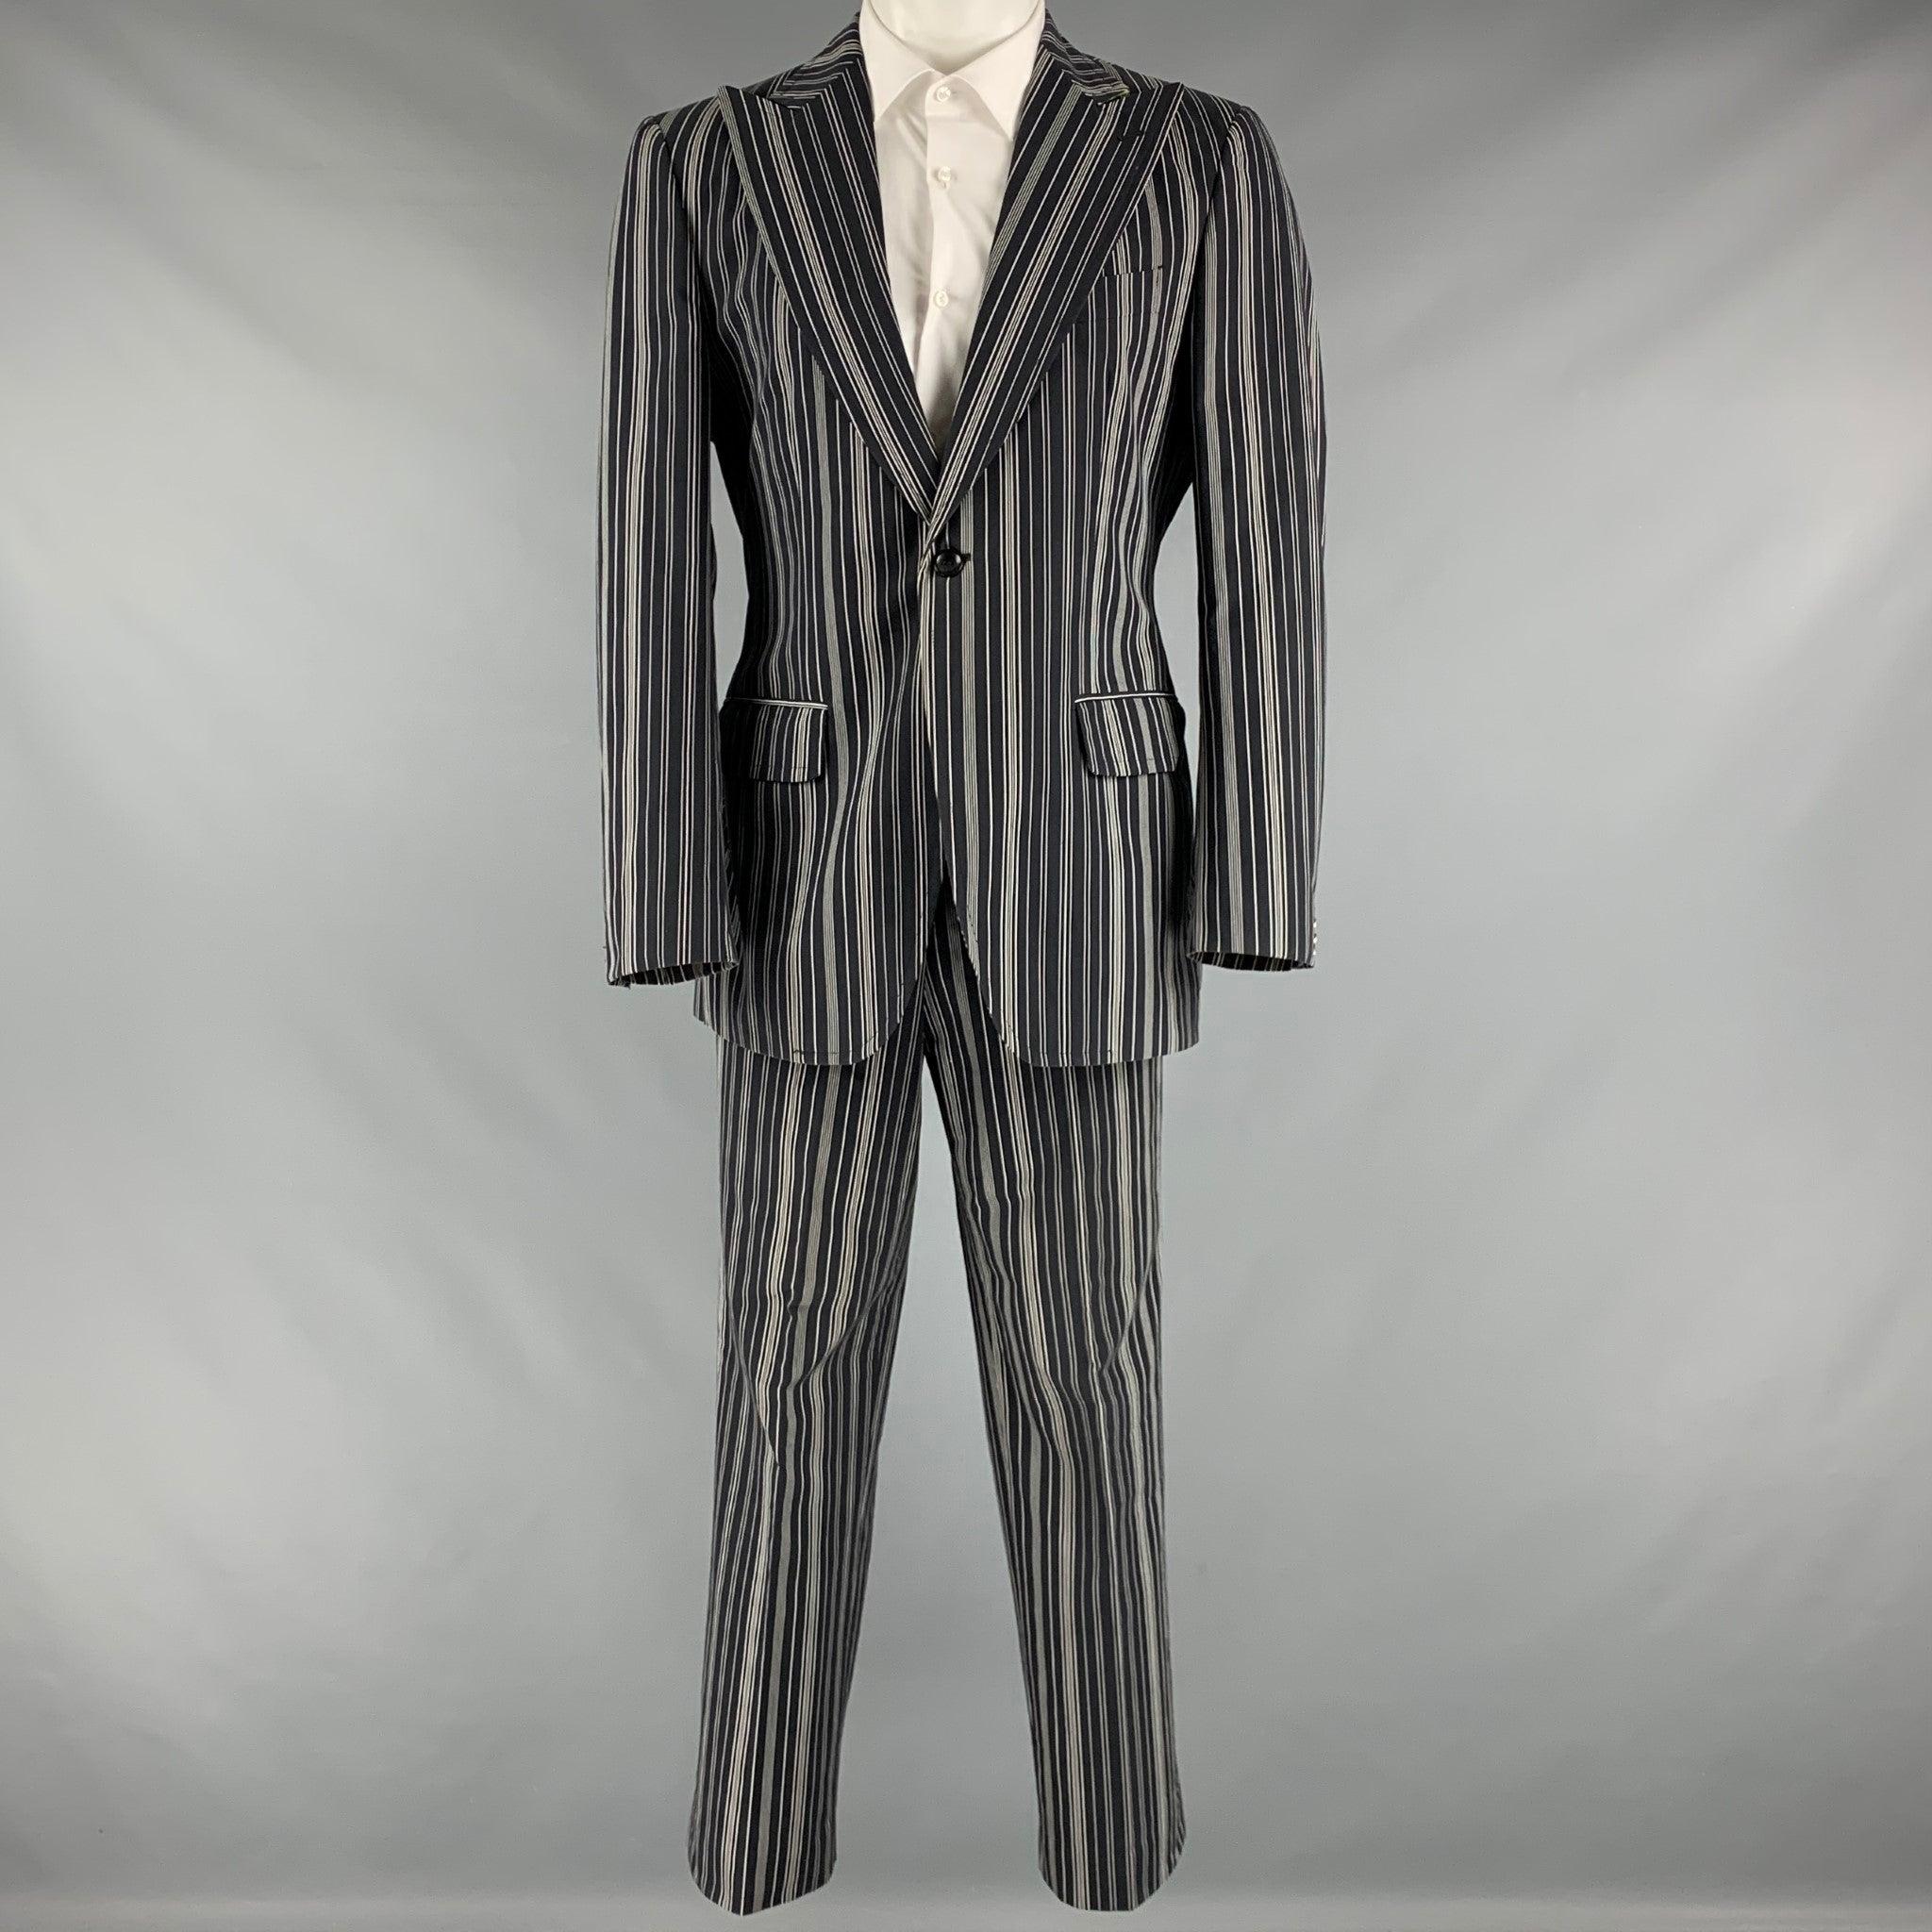 ETRO suit comes in a black and white striped cotton woven material with a full liner and includes a single breasted, single button sport coat with a peak lapel and matching flat front trousers. Excellent Pre-Owned Condition. 

Marked:   50 